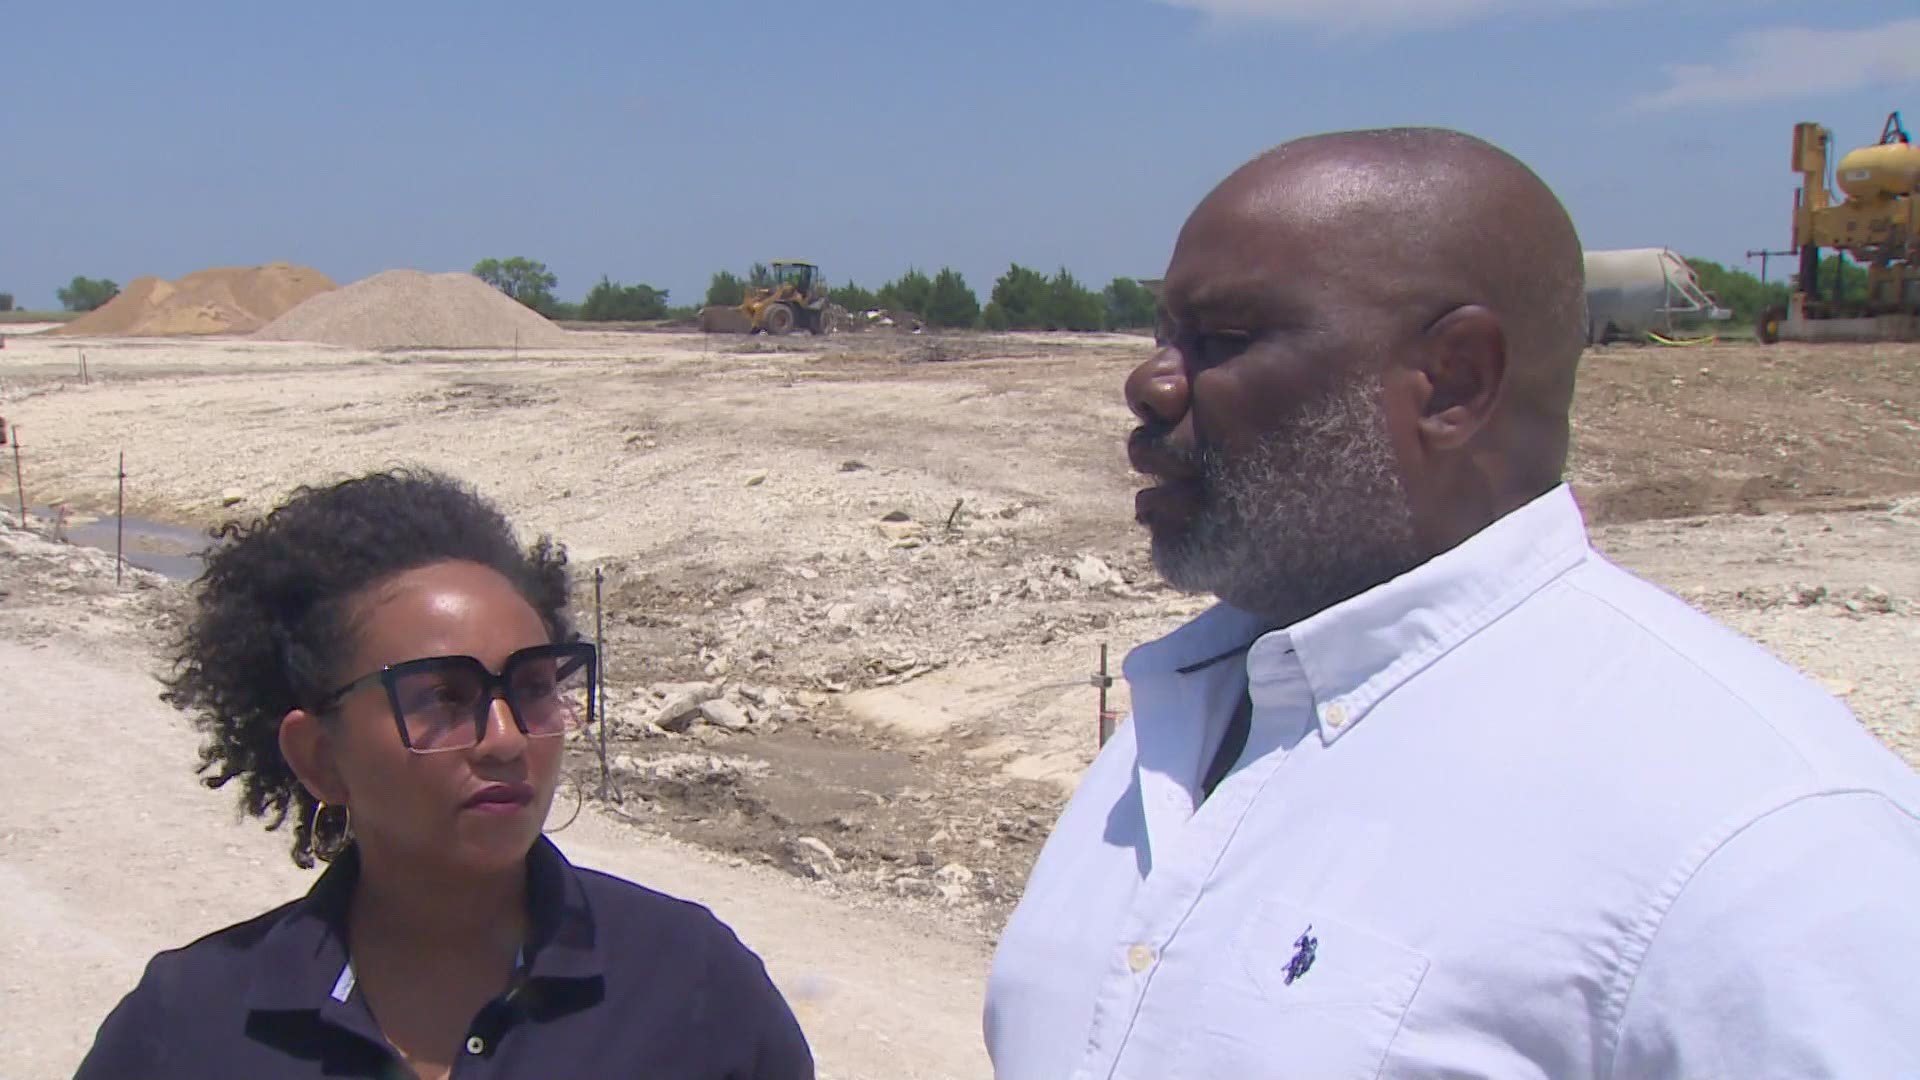 New housing development in Red Oak is inspired by the neighborhood known as "black wall street" that was destroyed in the Tulsa Race Massacre 100 years ago.